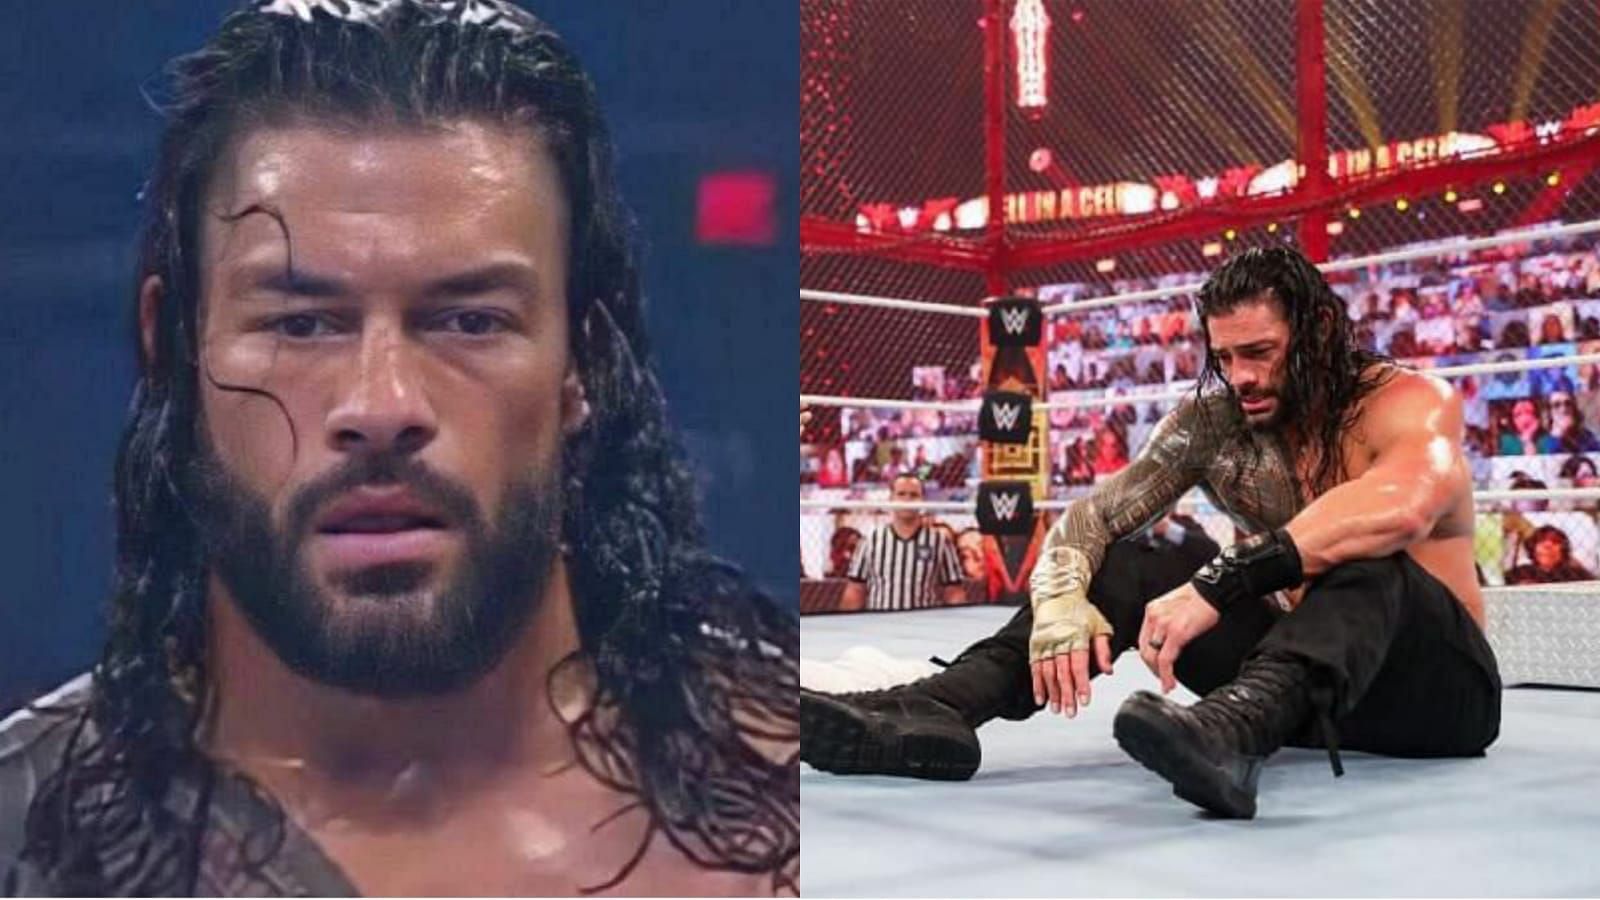 Roman Reigns was in action at WWE Money in the Bank!